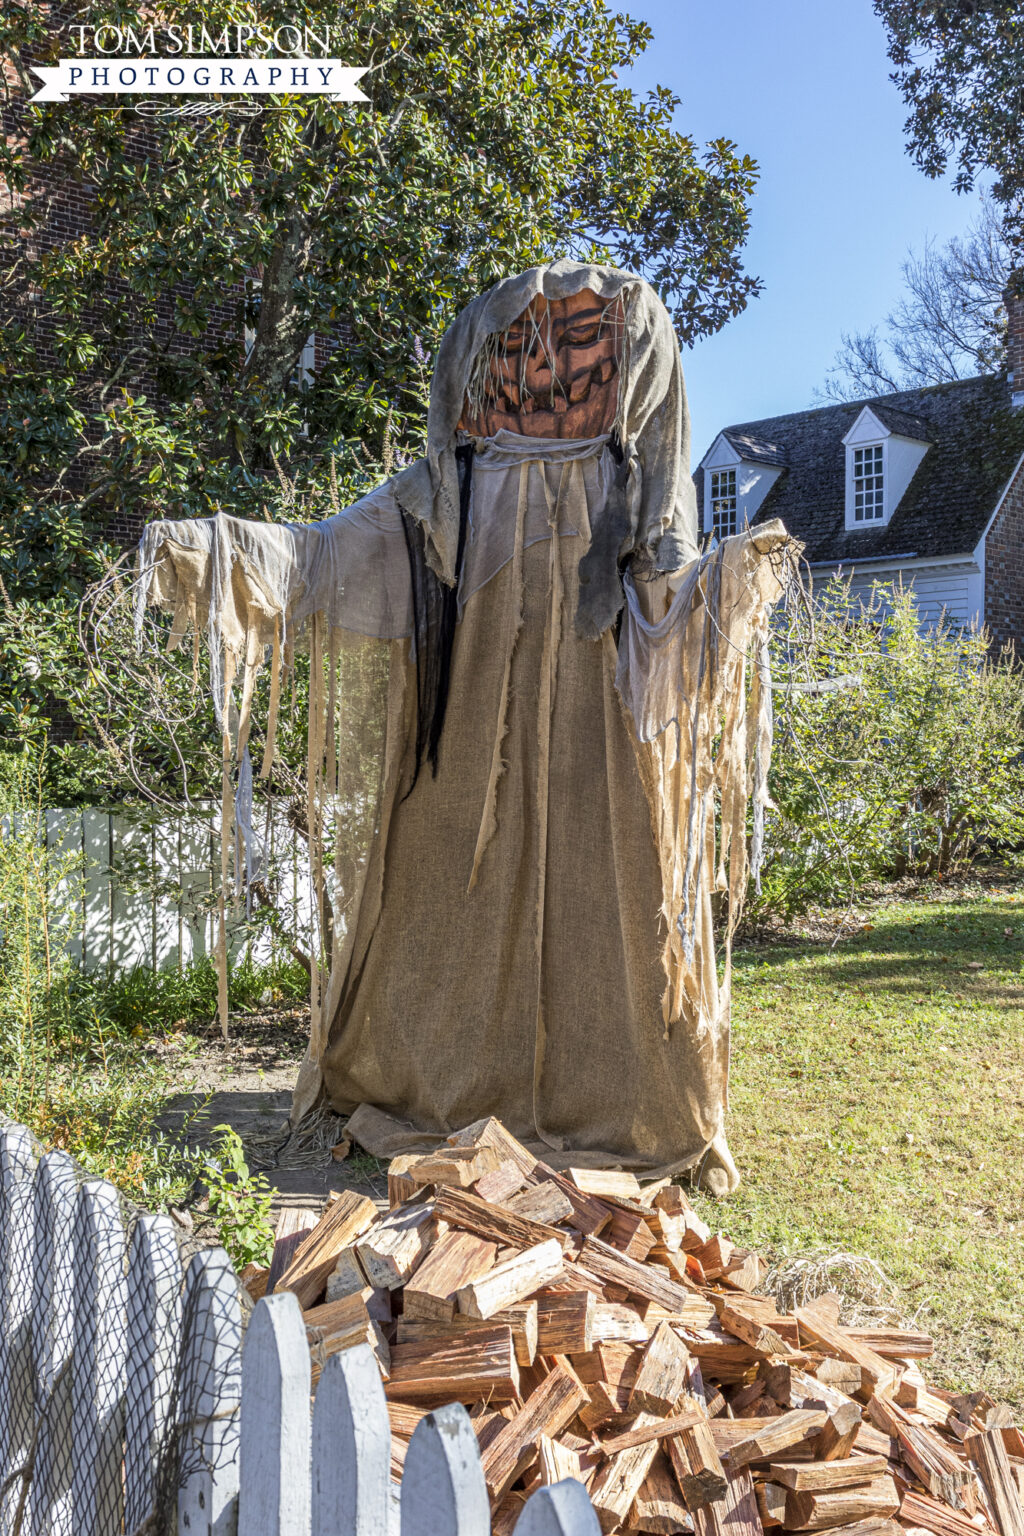 Delightful Surprise to see Halloween all over Colonial Williamsburg